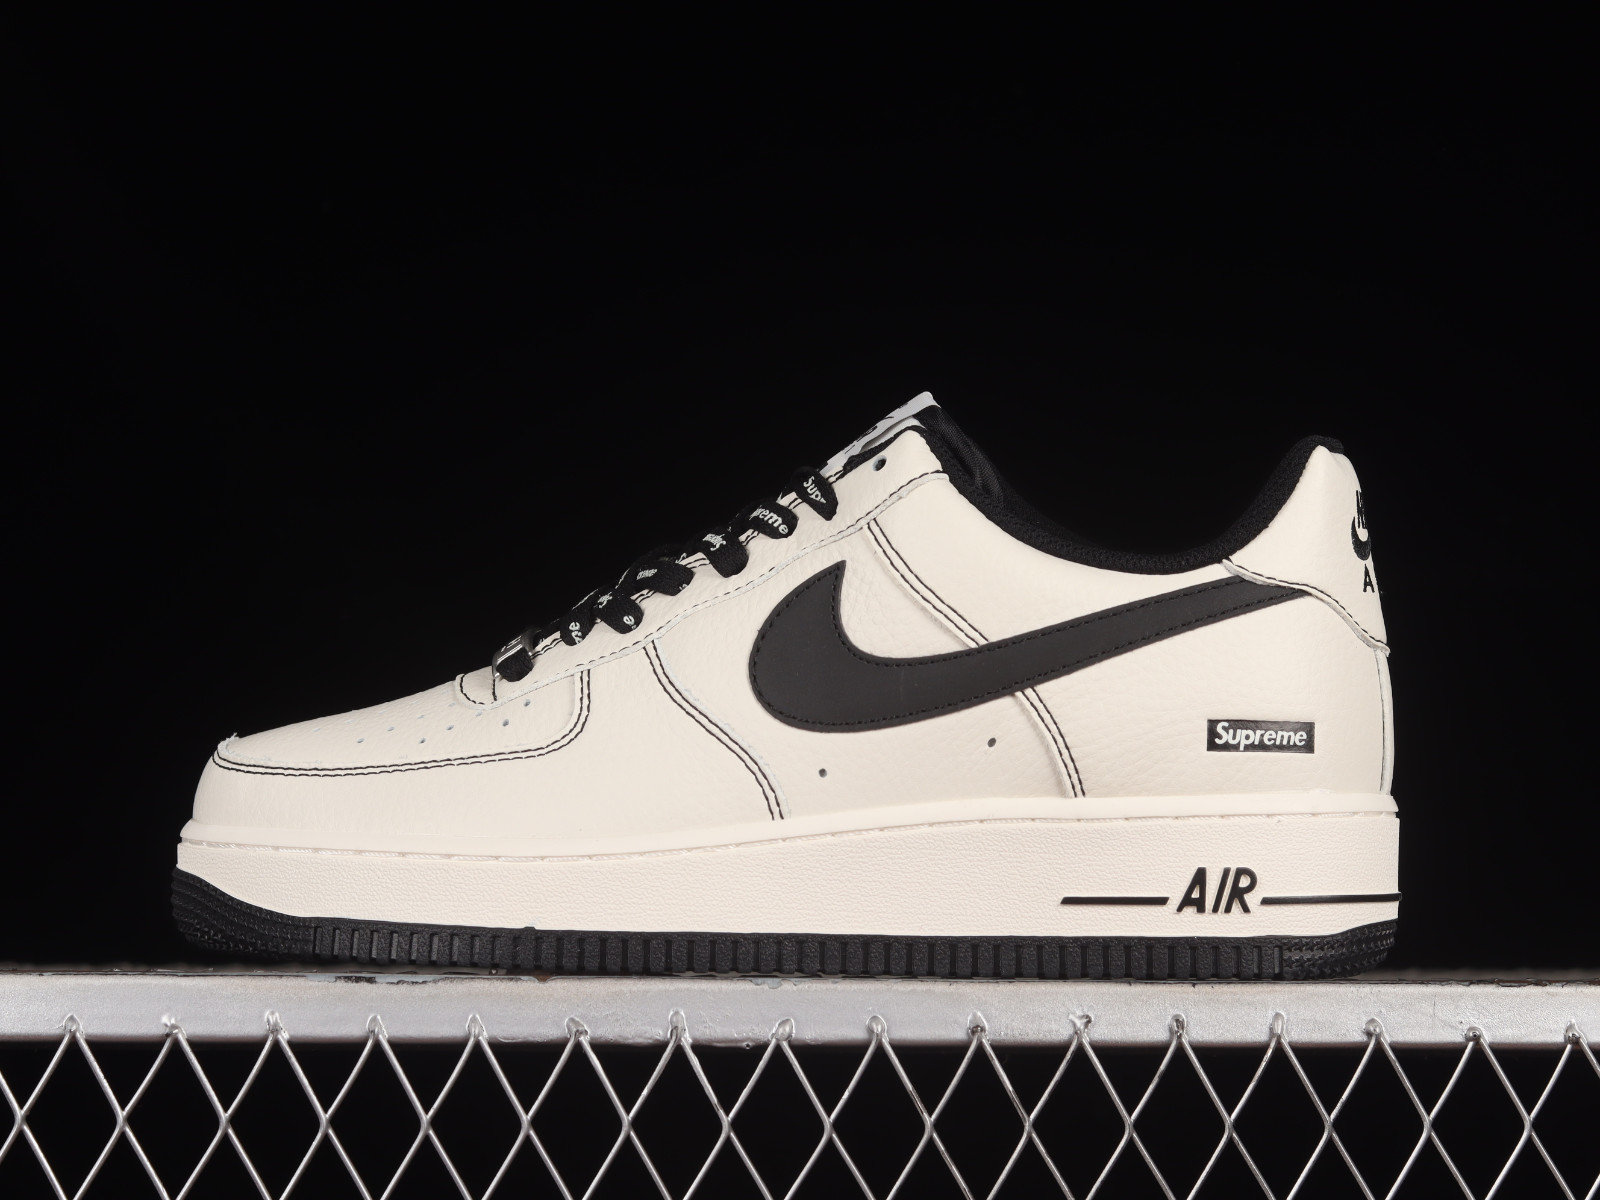 Air force 1 low trainers Nike x Off-White White size 10 US in